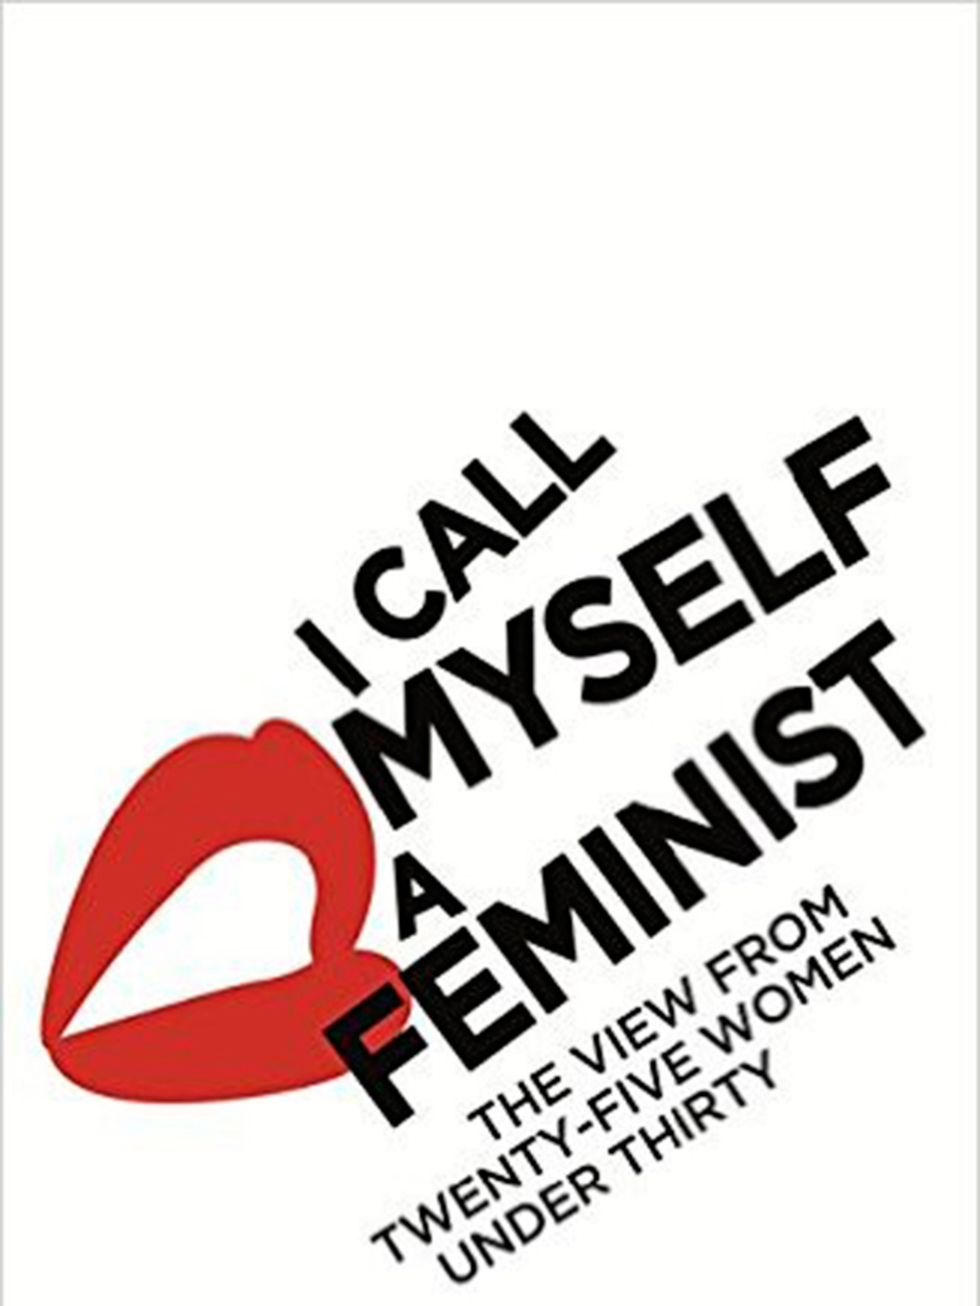 <p><strong>3. I Call Myself a Feminist edited by Victoria Pepe (Virago)</strong></p>

<p>This is the probably the book that affected me the most this year; its an inspiring, intelligent, angry, diverse and wonderful collection of essays by women under 30